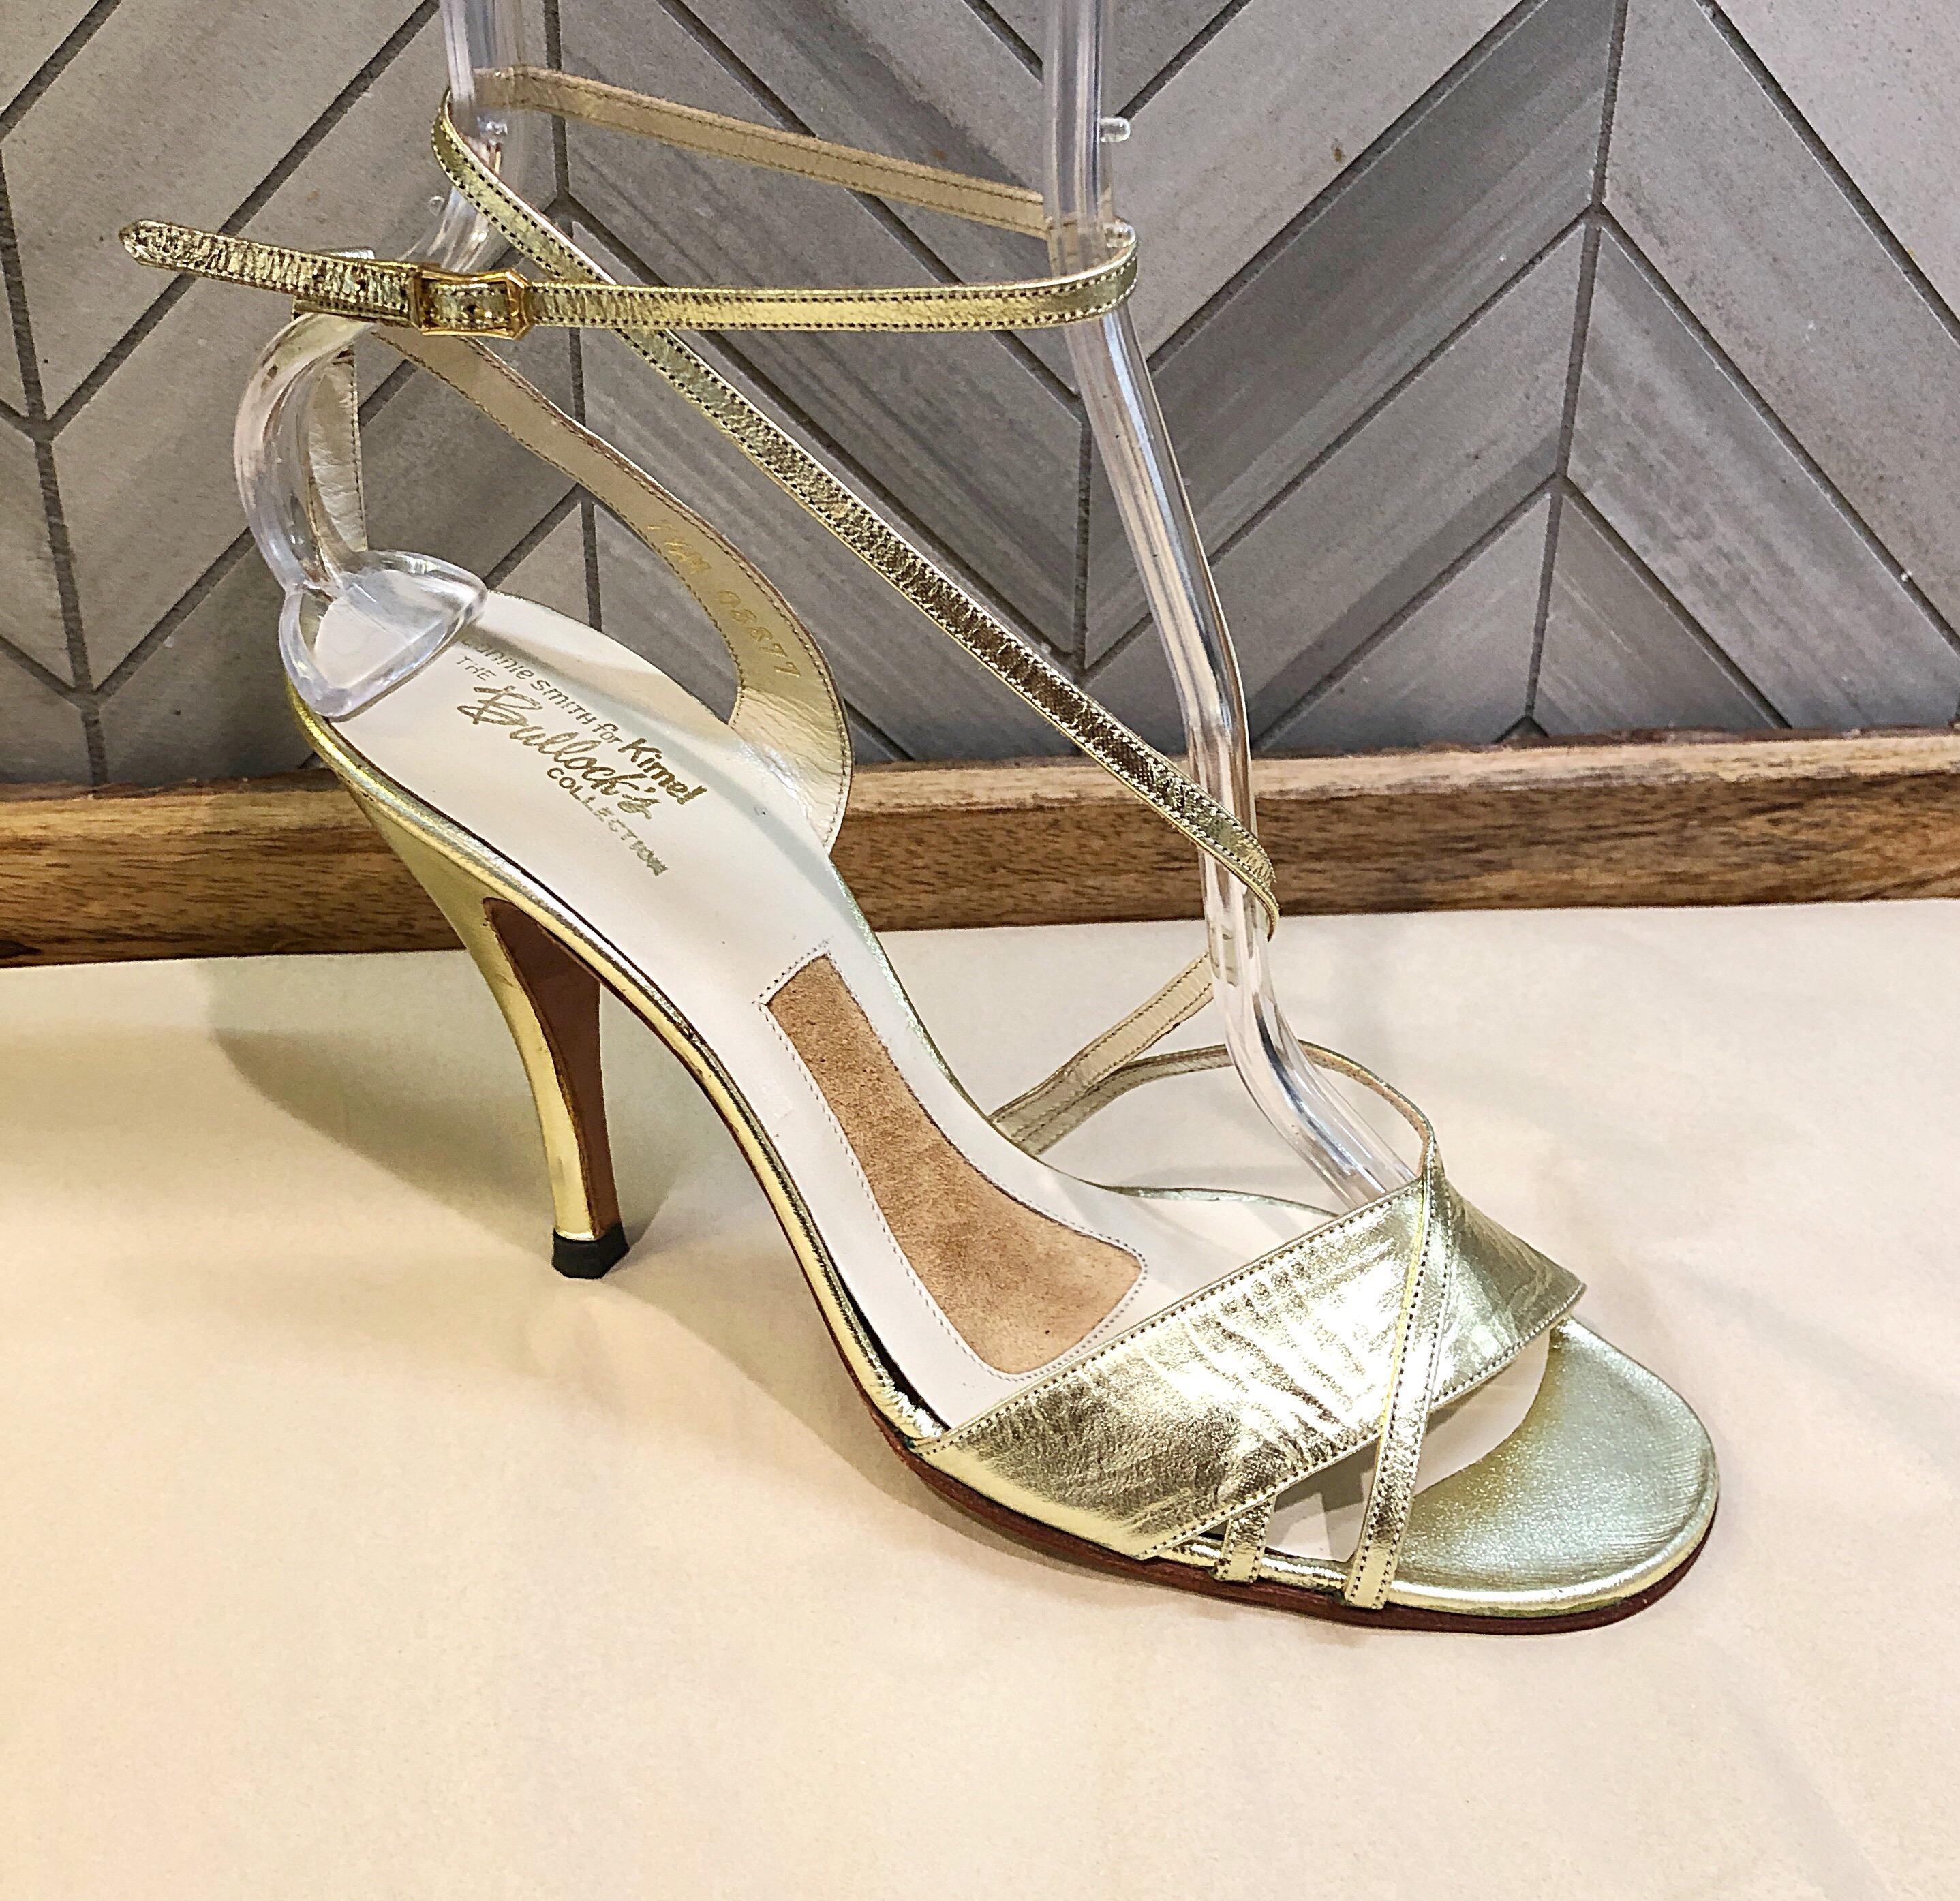 New 1970s Connie Smith Bullocks Wilshire Size 7.5 Gold Metallic Strappy Heels For Sale 4